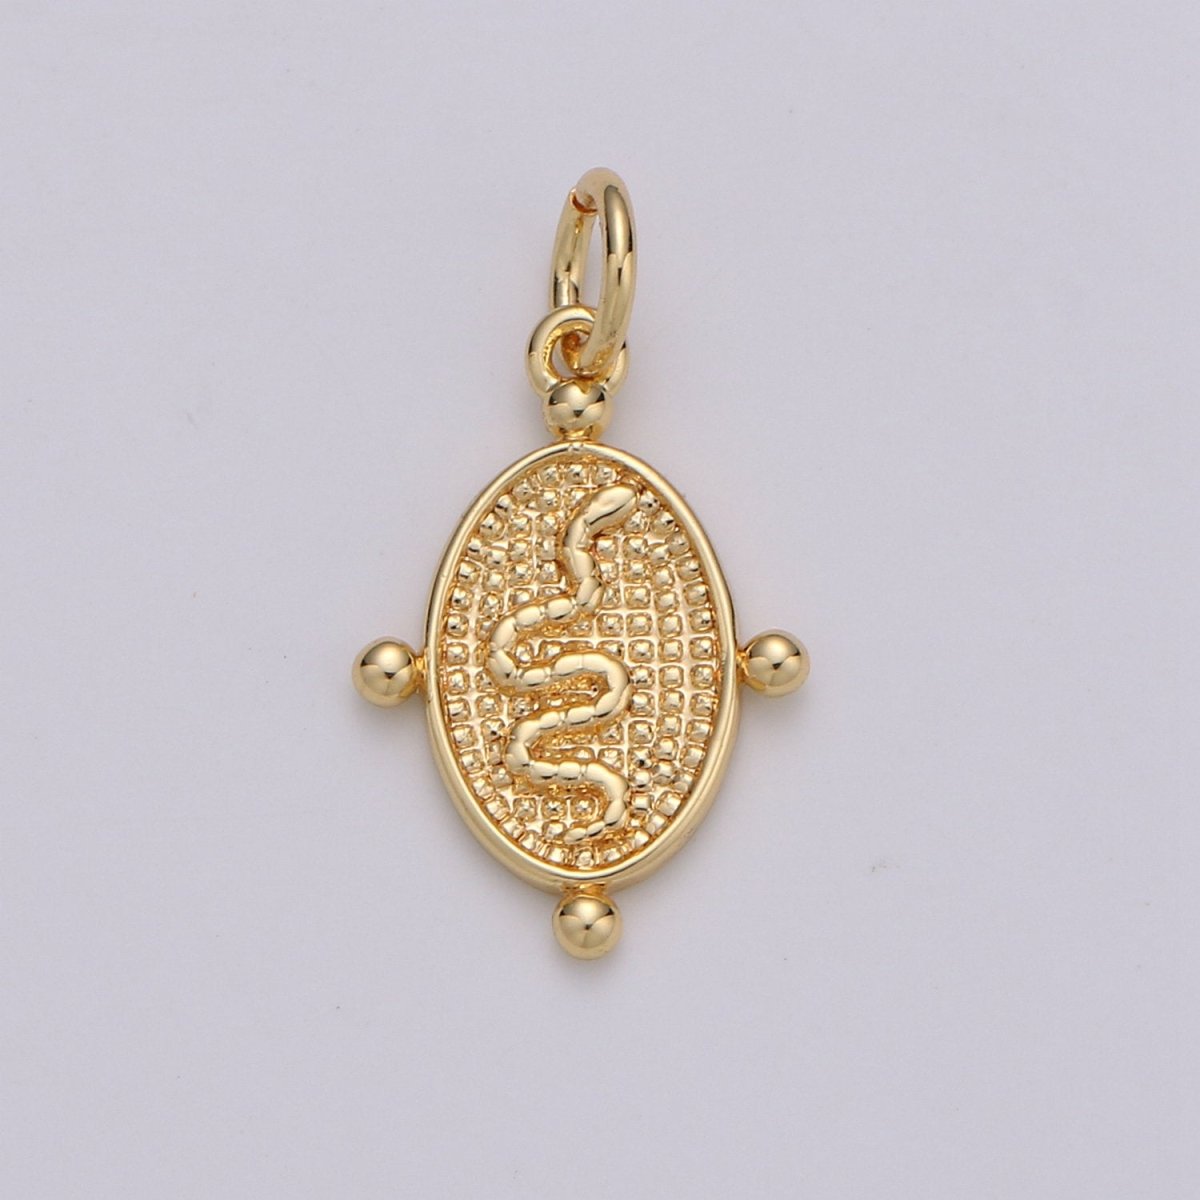 24k Gold Filled Snake Pendant Charm, Dainty Oval Pendant Charm, Gold Filled Pendant Silver Serepent Charm For DIY Jewelry D-435 D-436 - DLUXCA